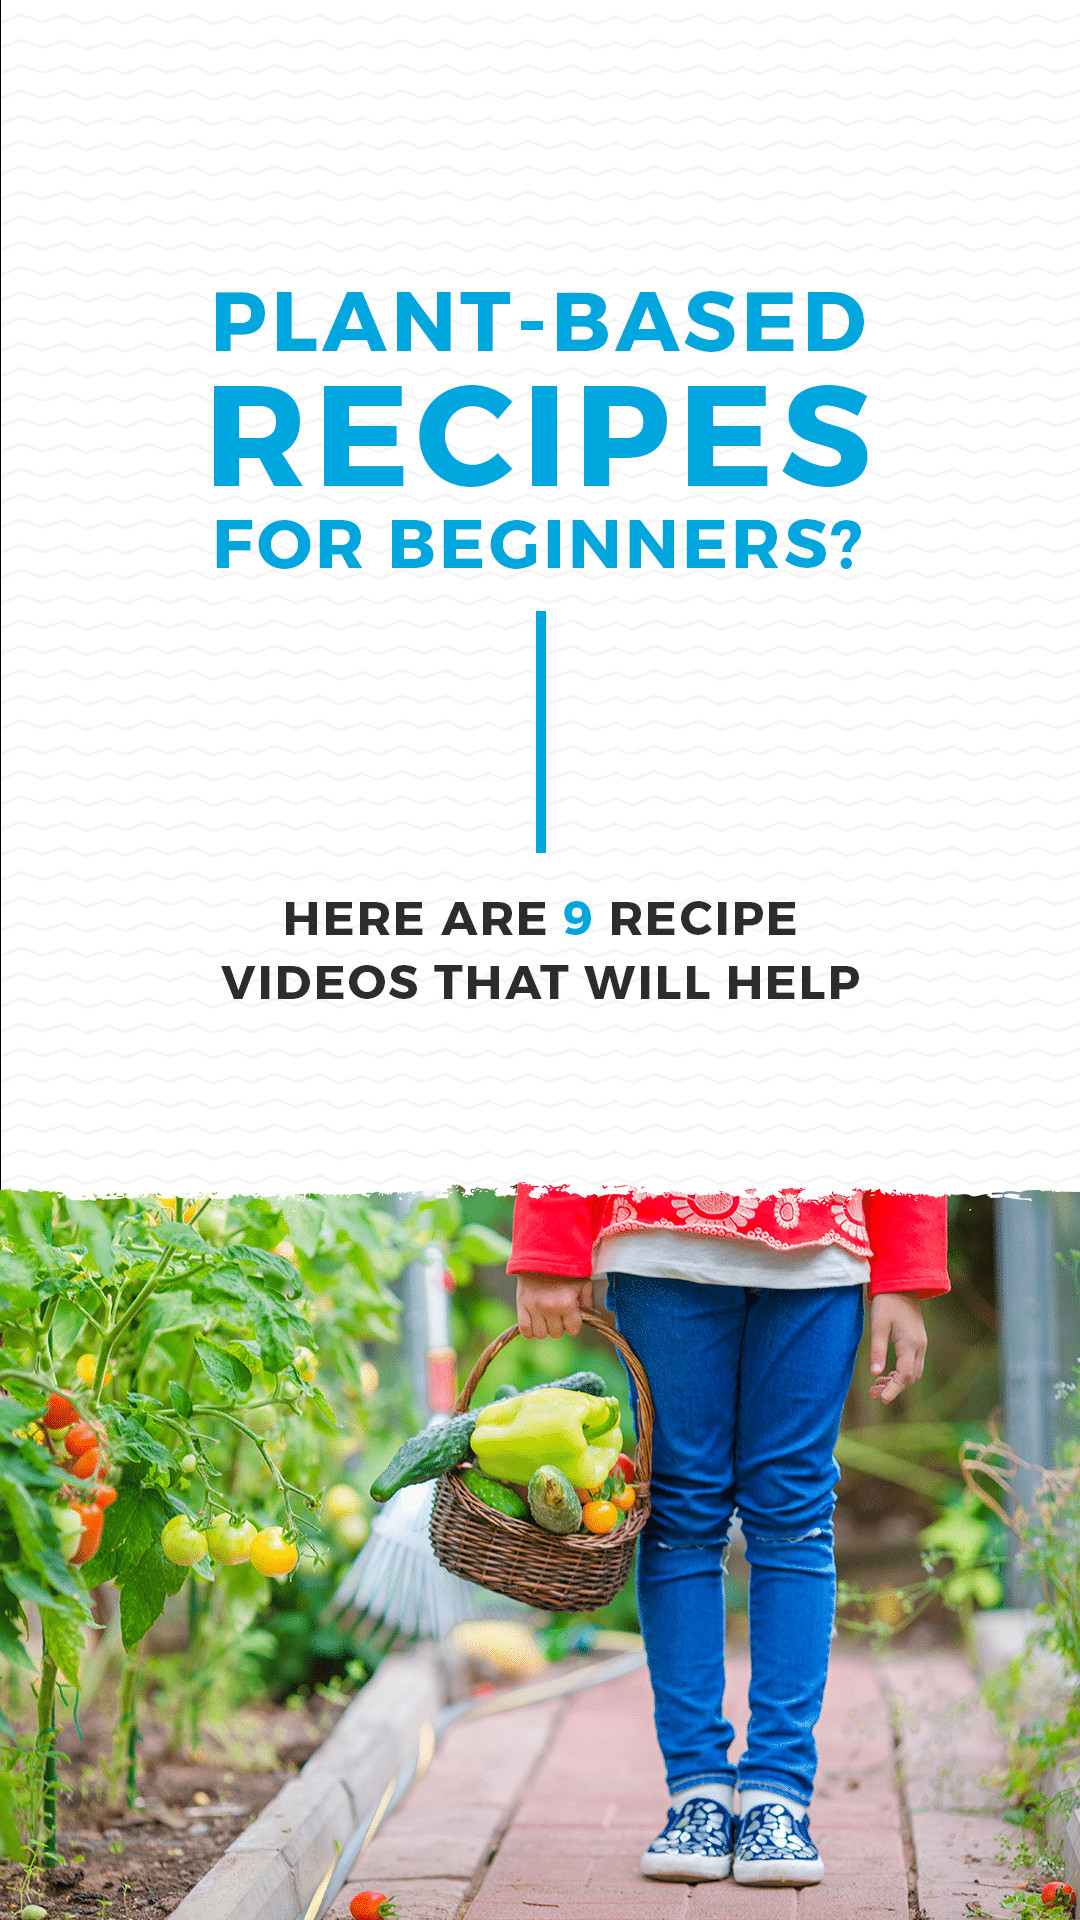 Plant Based Recipes Videos
 Plant Based Recipes for Beginners Here Are 9 Recipe